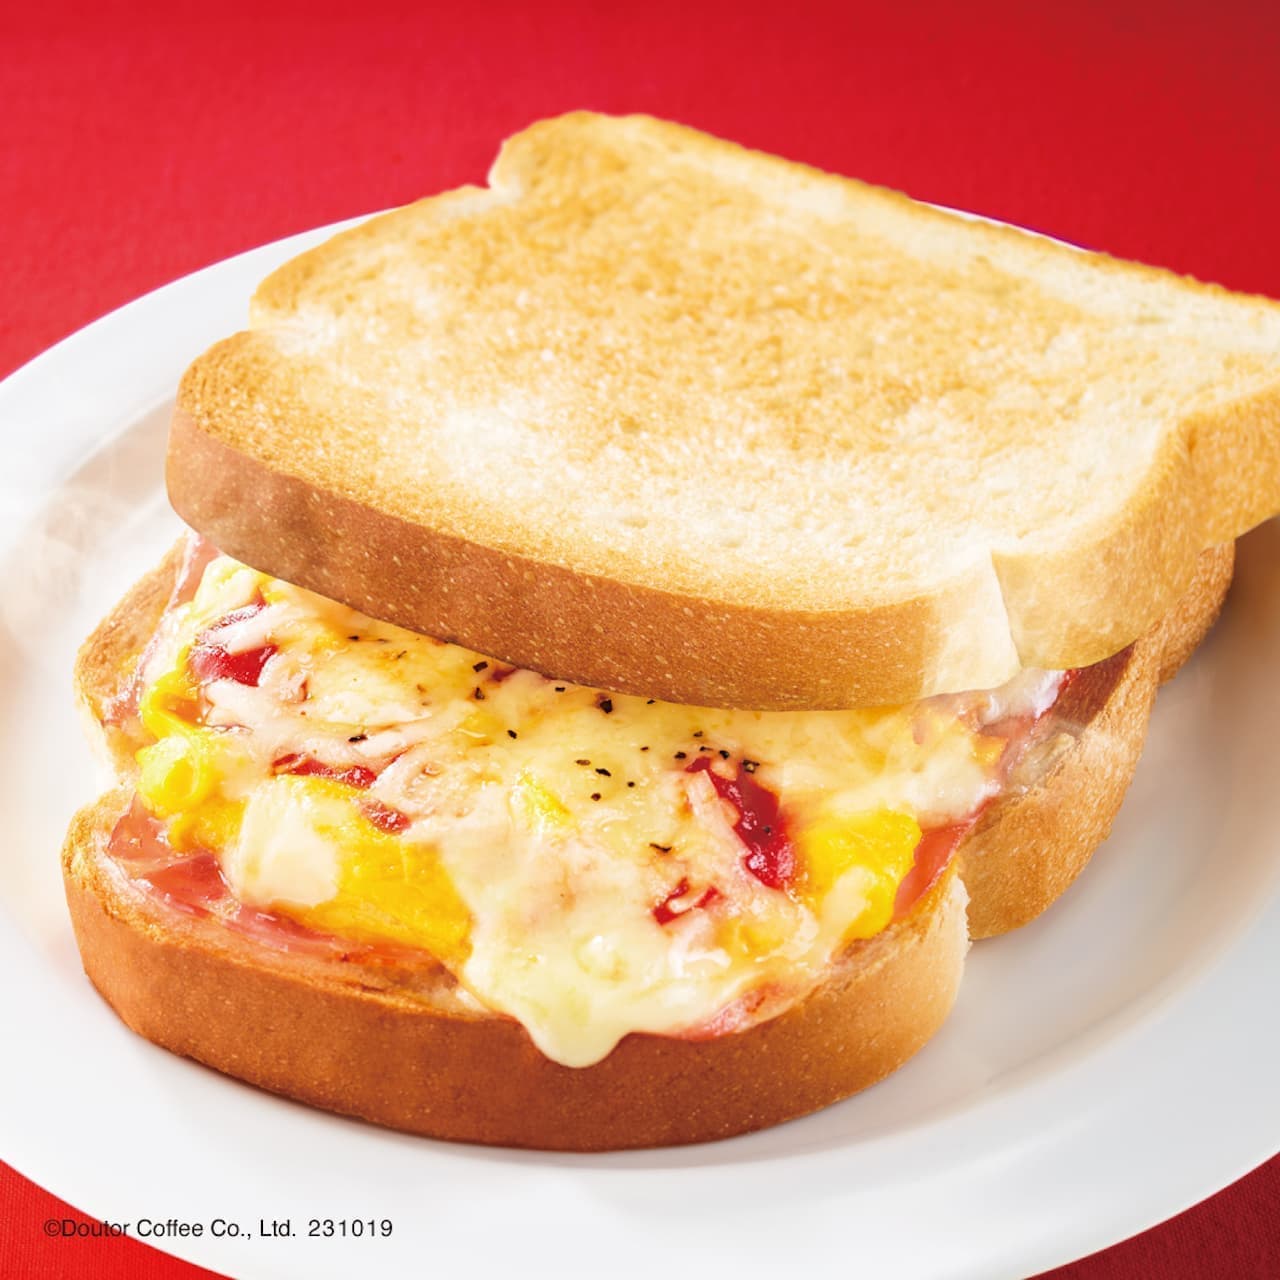 Doutor Morning Limited Edition "Hot Morning Bacon and Eggs" Menu